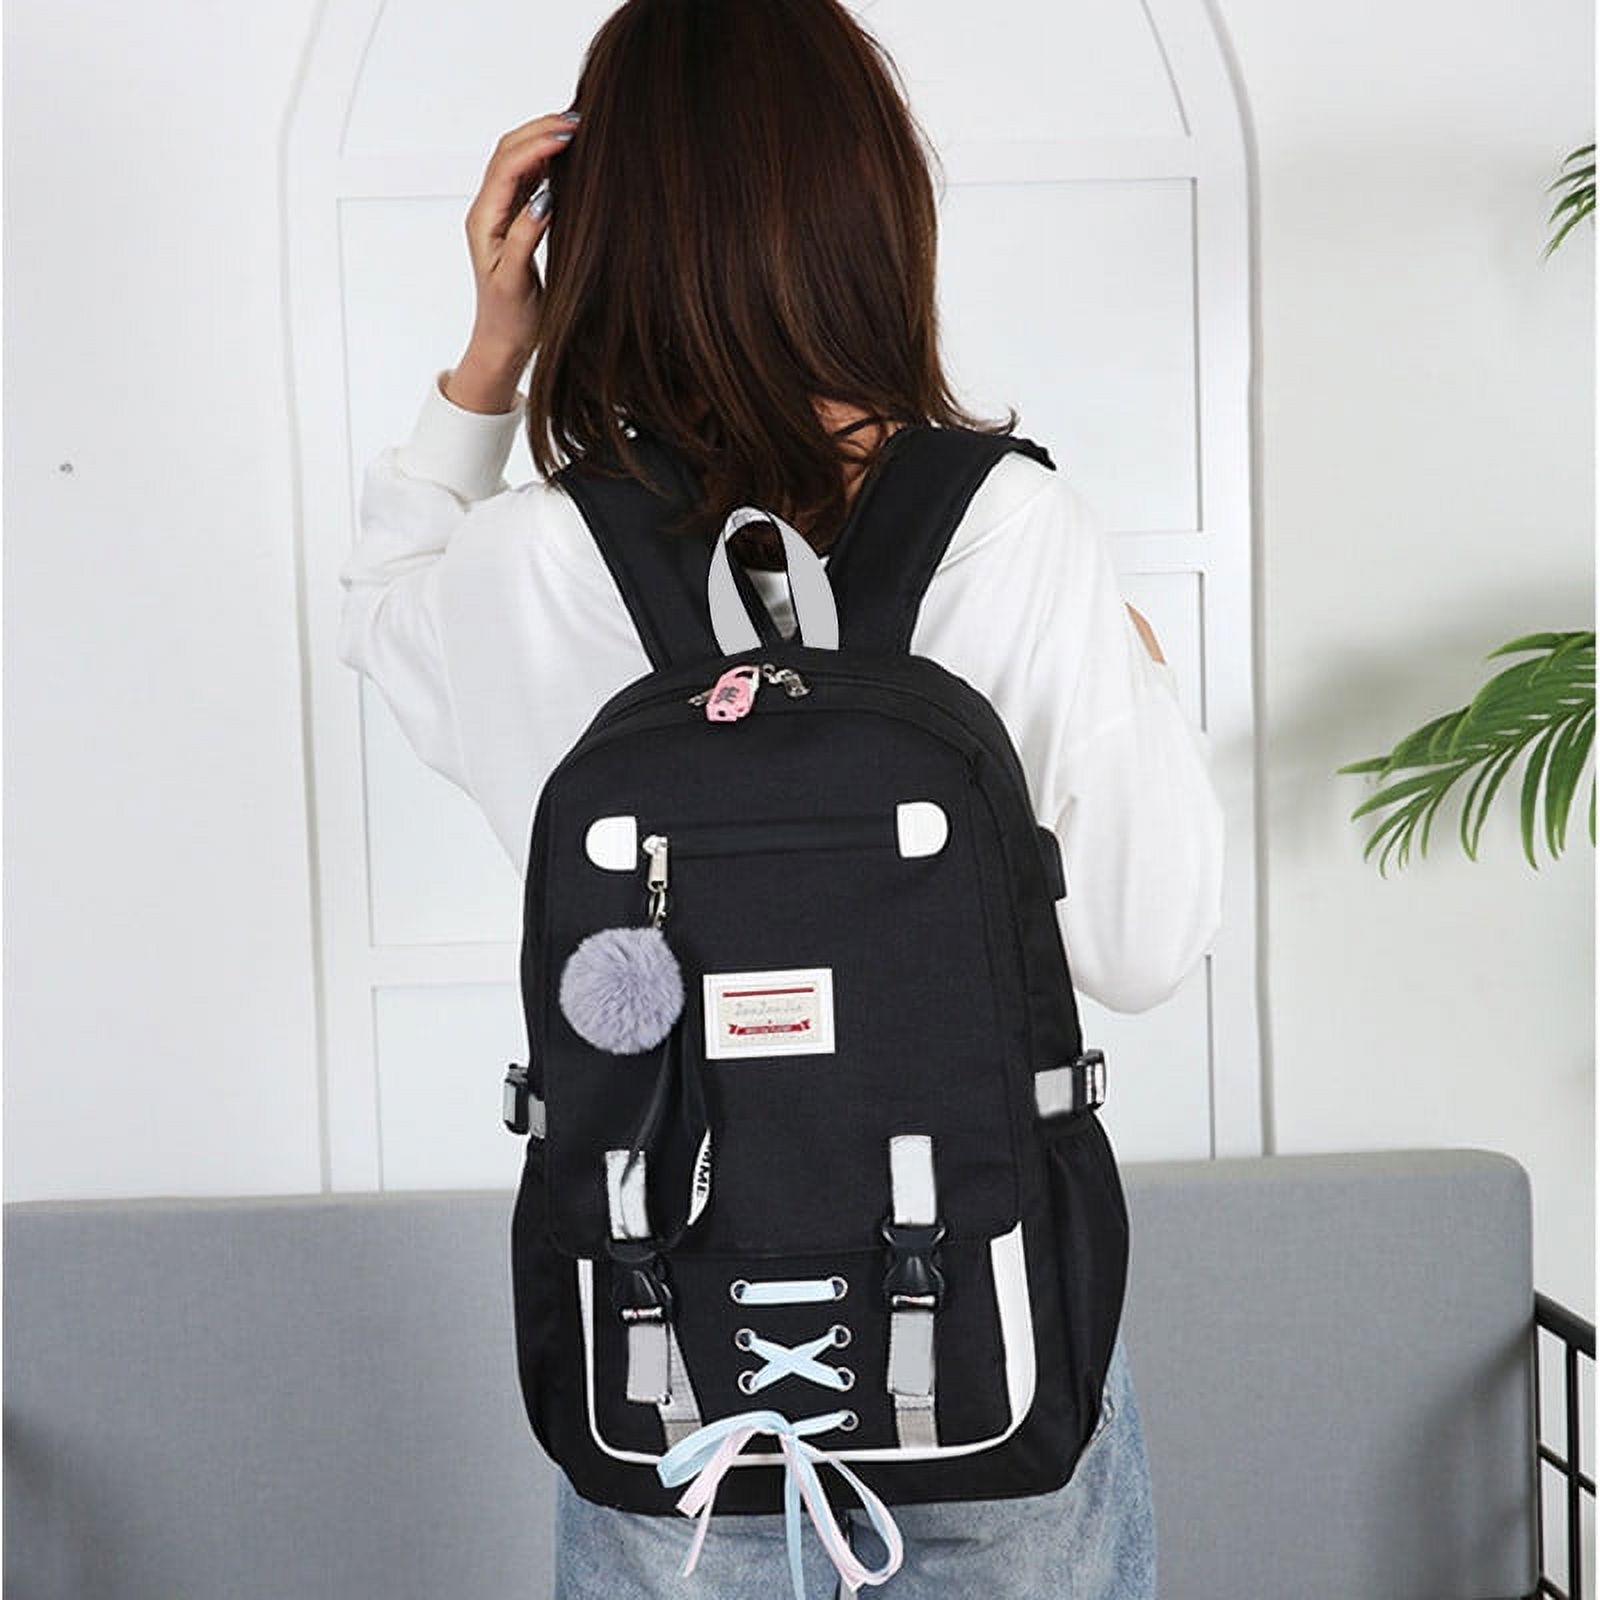 School Bags Large Bookbags for Teenage Girls USB with Lock Anti Theft Backpack Women Book Bag Youth Leisure College - image 4 of 6